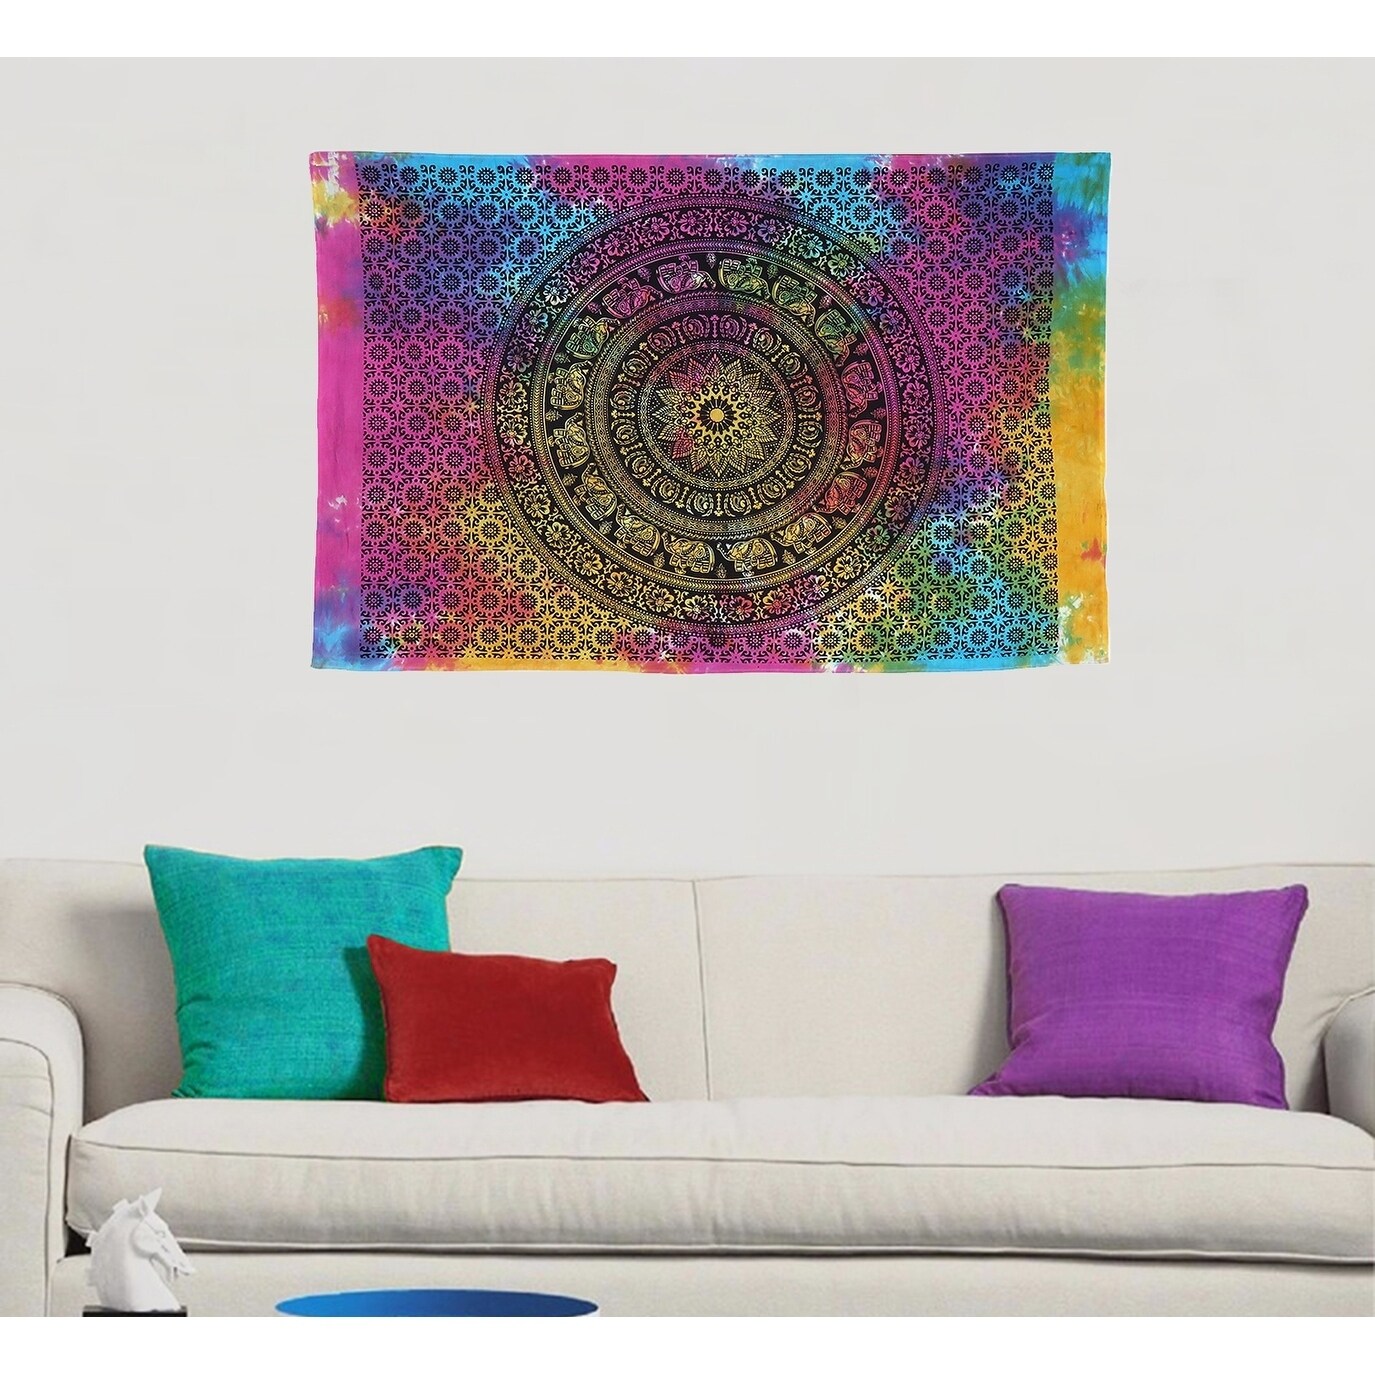 Shop Multi Color Boho Mandala Hippie Wall Hanging Poster Tapestry Throw Decor 30x45 Inches Overstock 21731035